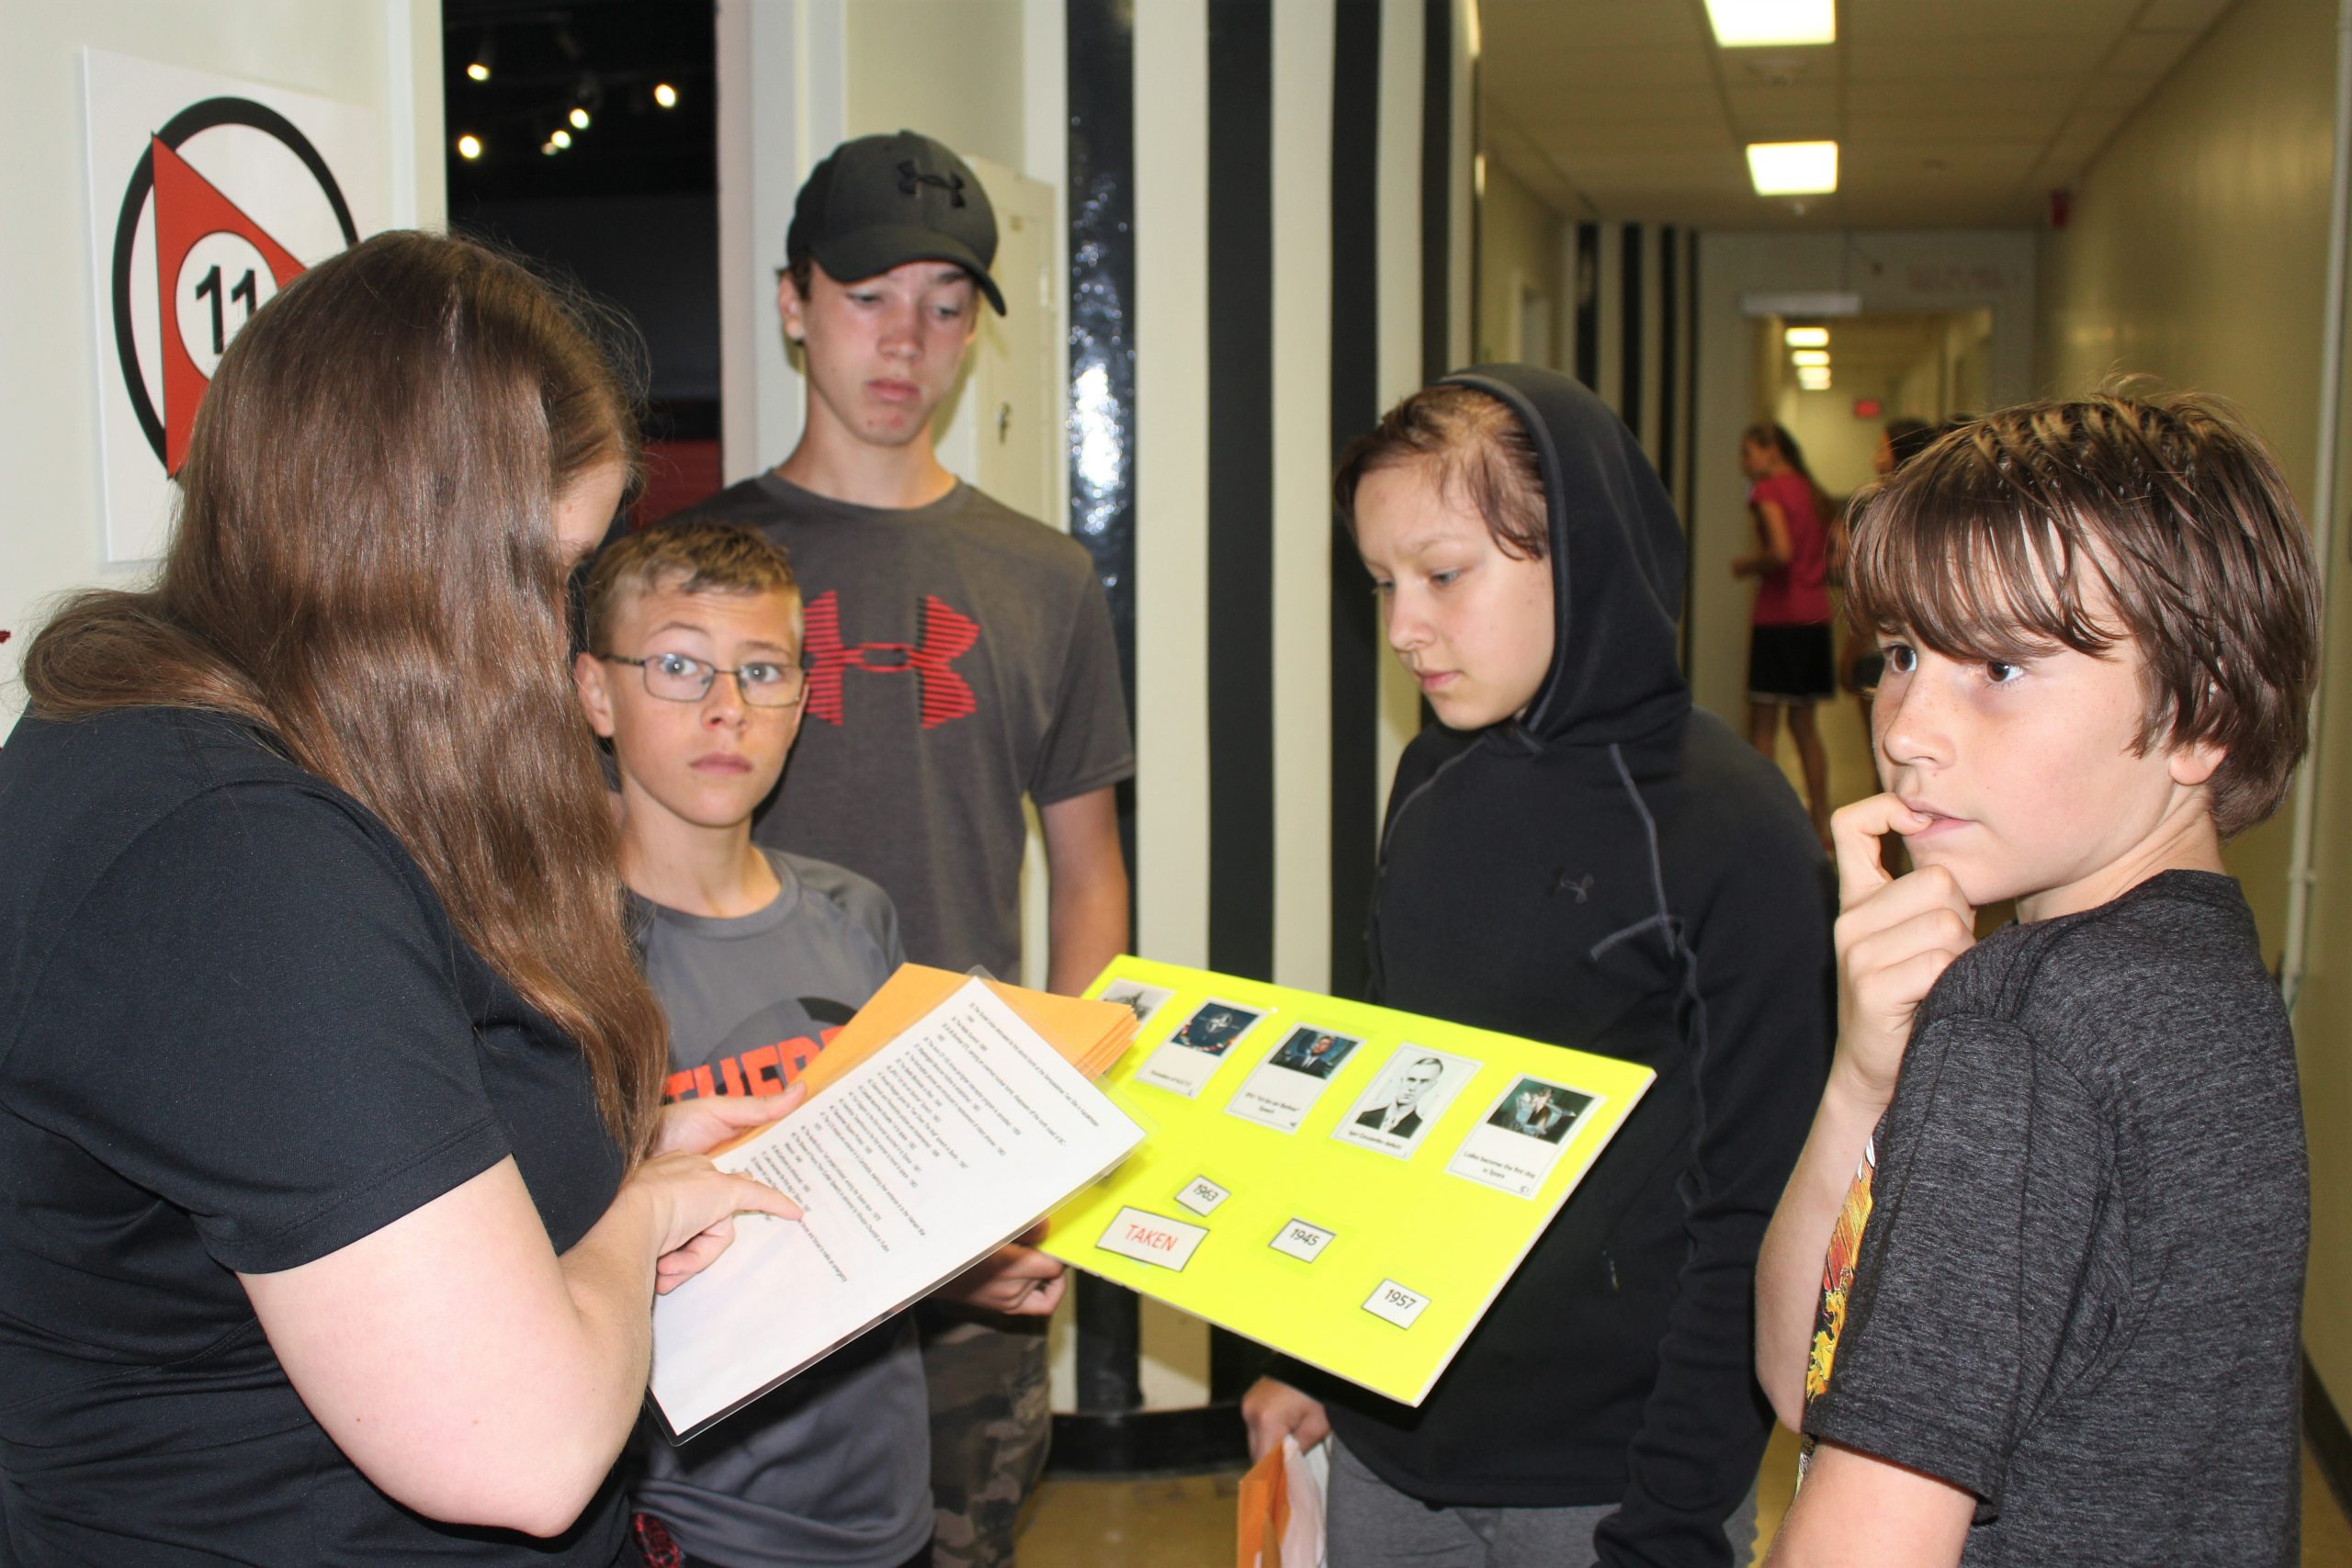 Four students look at a board of clues held by the facilitator in front of them in the hallway of the Diefenbunker.